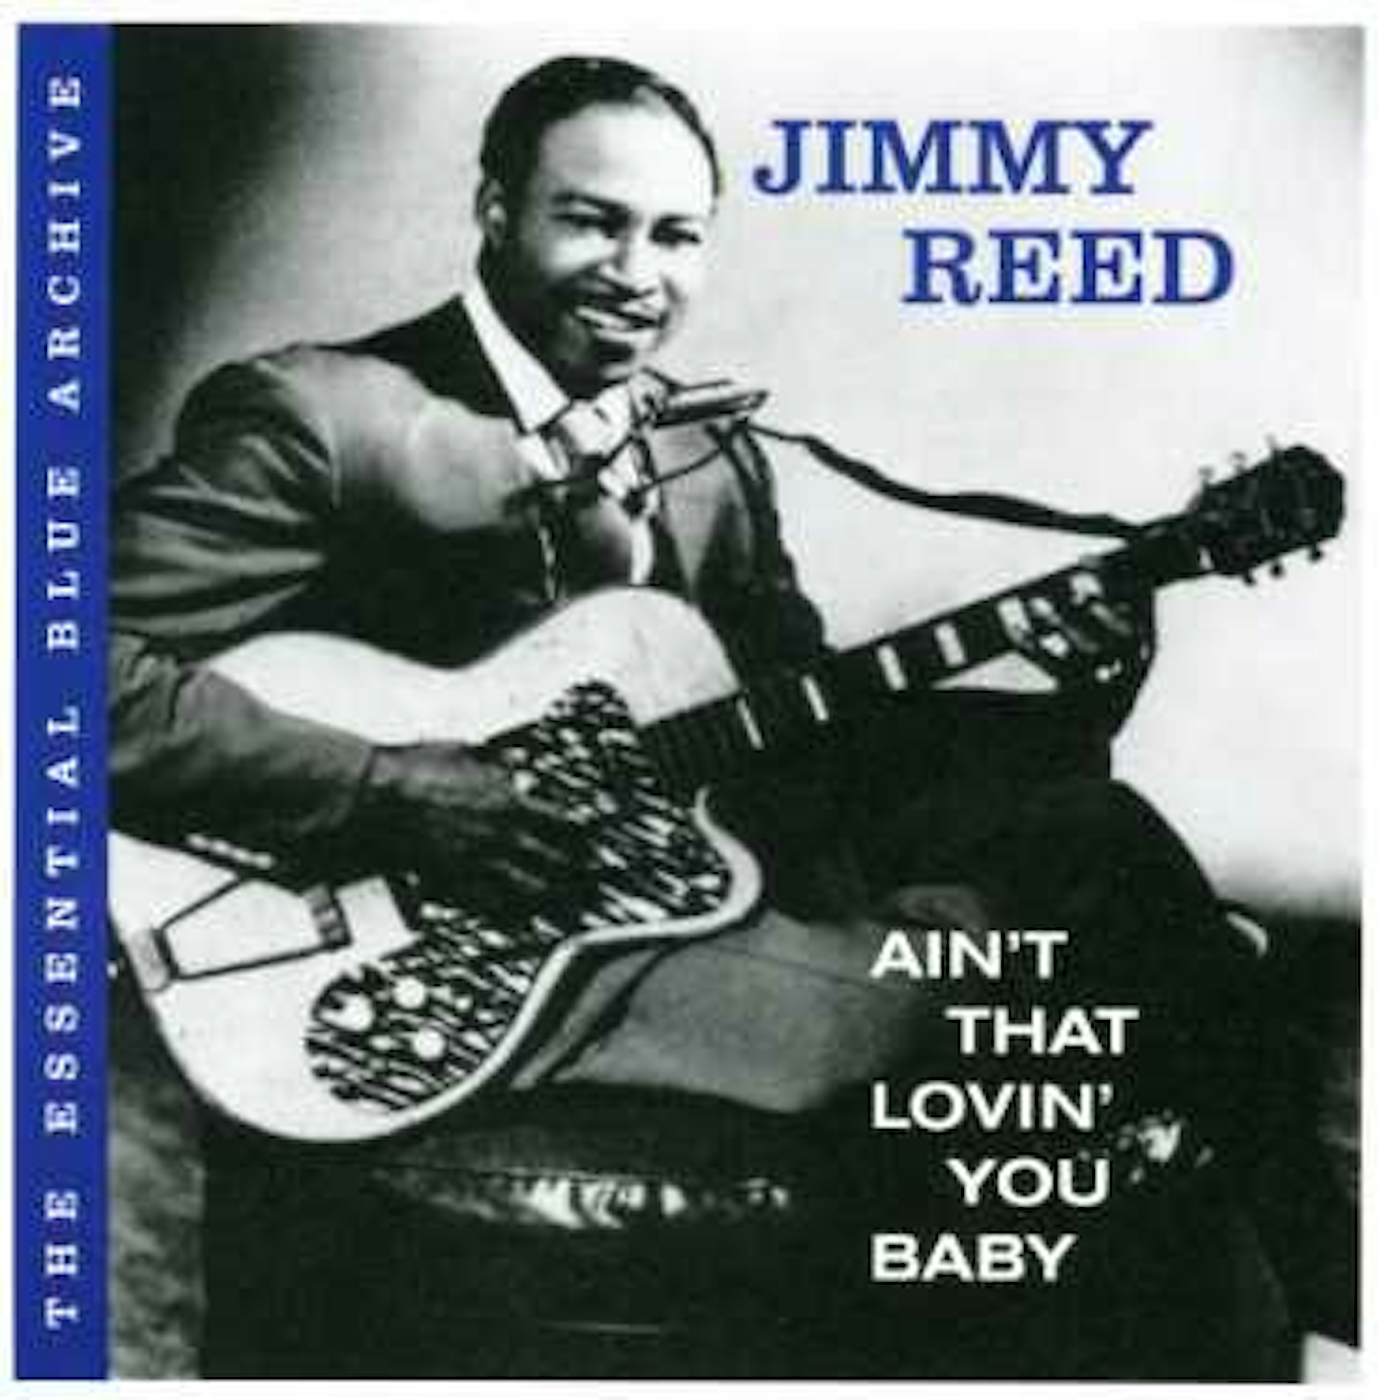 Jimmy Reed AIN'T THAT LOVIN' YOU BAB CD